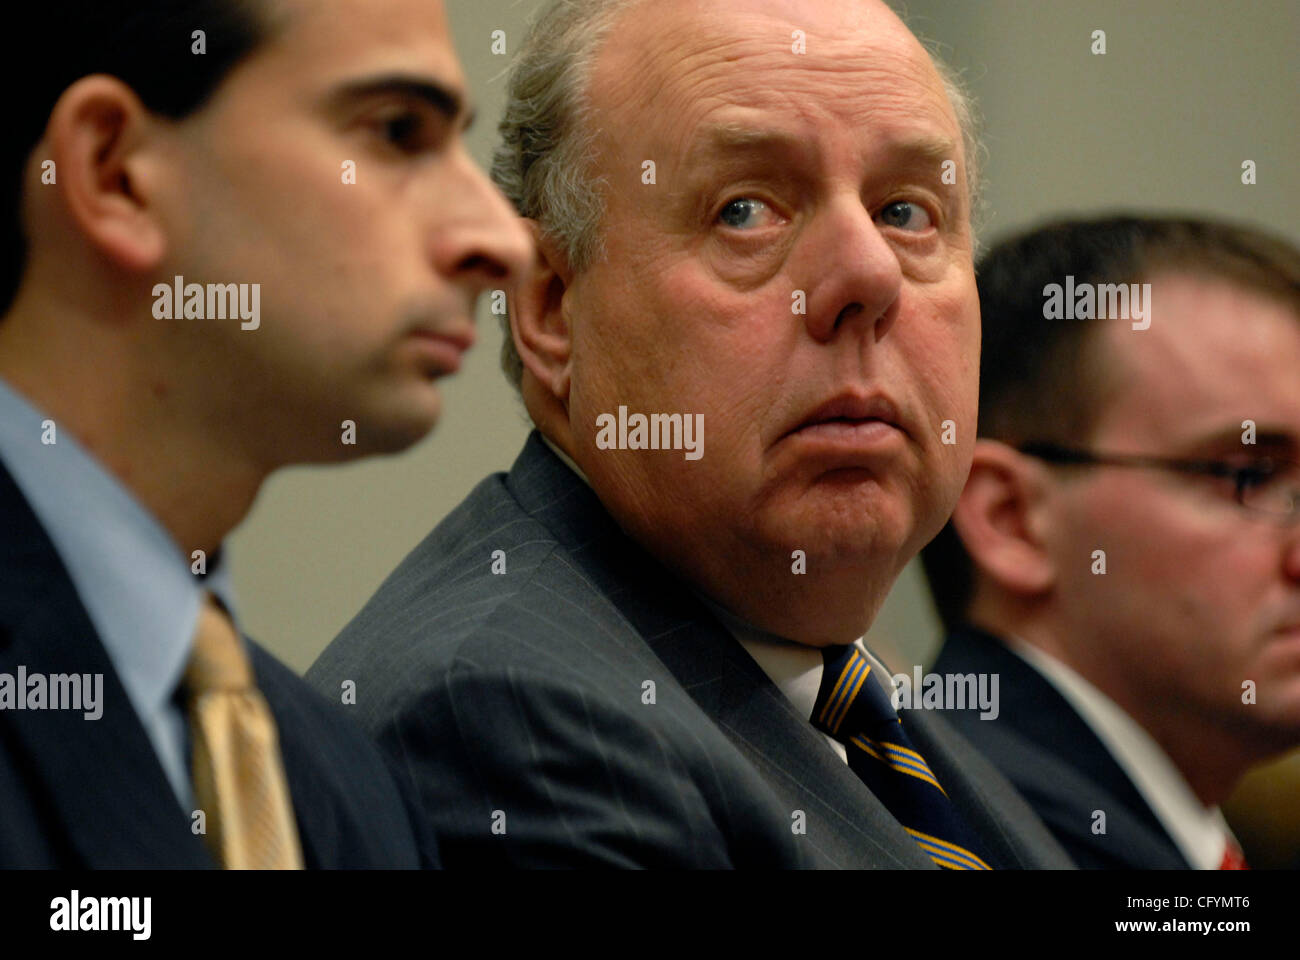 May 23, 2007 - Washington, DC, USA - JOHN DOWD, lawyer for Monica Goodling, former Justice Department liaison to the White House, listens to Goodling's testimony before the House Judiciary committee about her role in the firing of US attorneys in late 2006 and early 2007. Goodling denied taken a maj Stock Photo